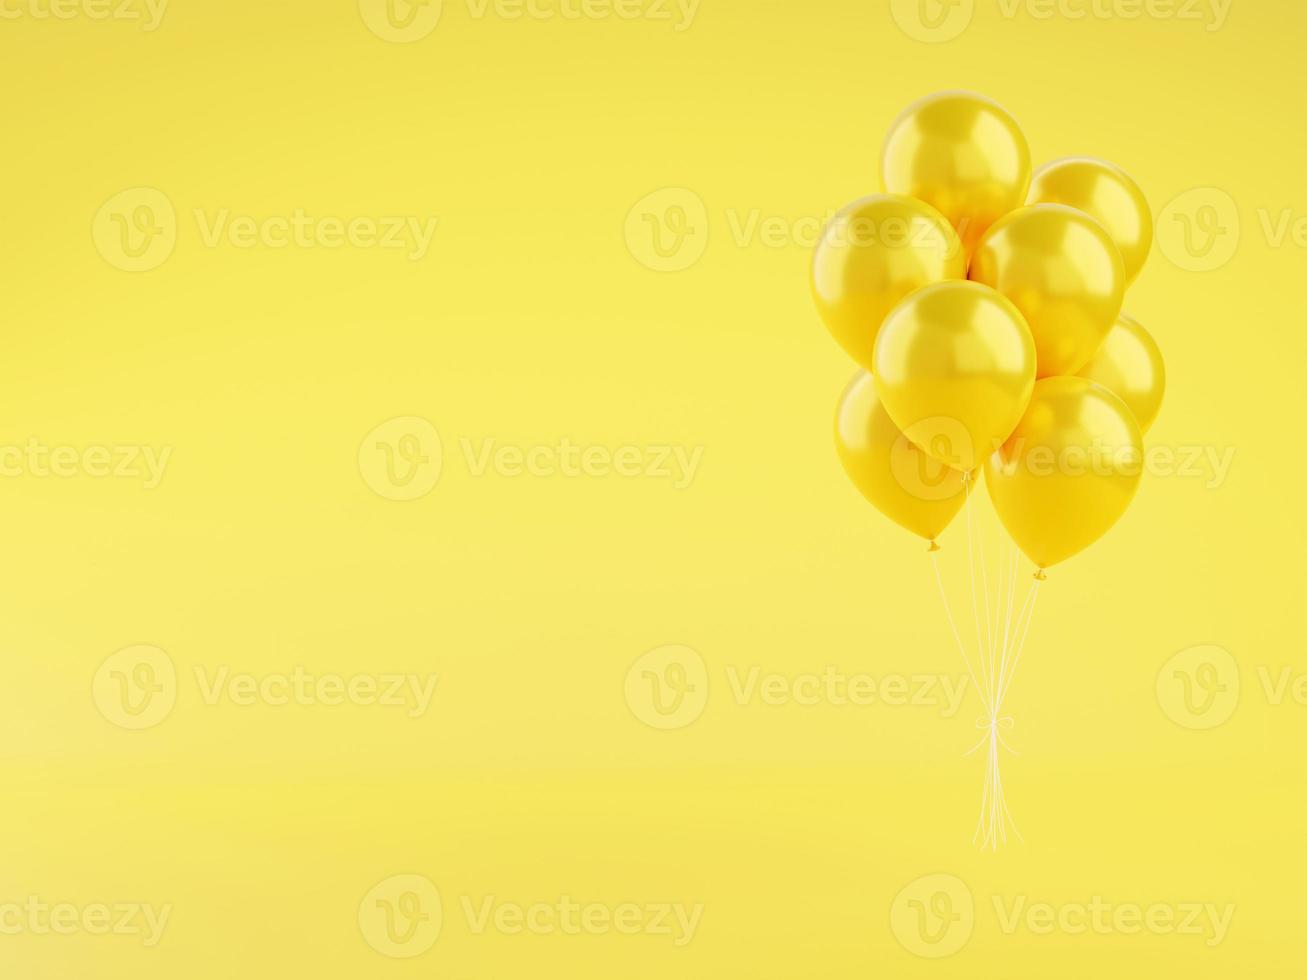 Yellow glossy balloons 3d render illustration on background with copy space. photo